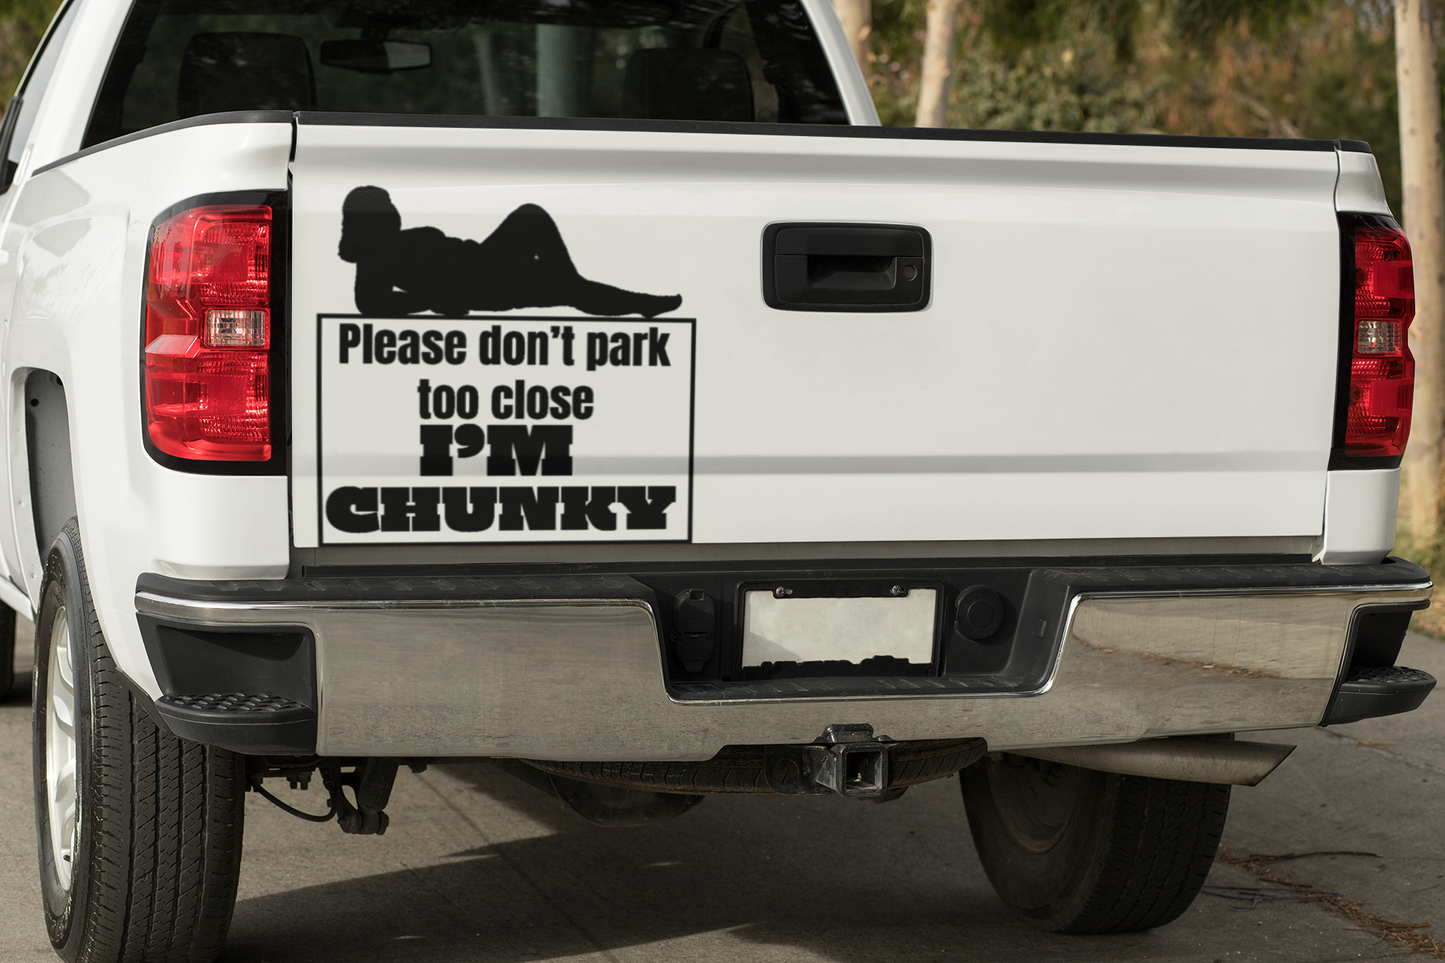 Don't park too close, I'm chunky Vinyl decal boss gift car decor dads day gift gift for dad gift for grandpa gift for her gift for him gift for husband gift for mom gift for sister gift for wife moms gift Unique gift Vinyl Vinyl decals vinyl sticker Vinyl stickers window decal window sticker